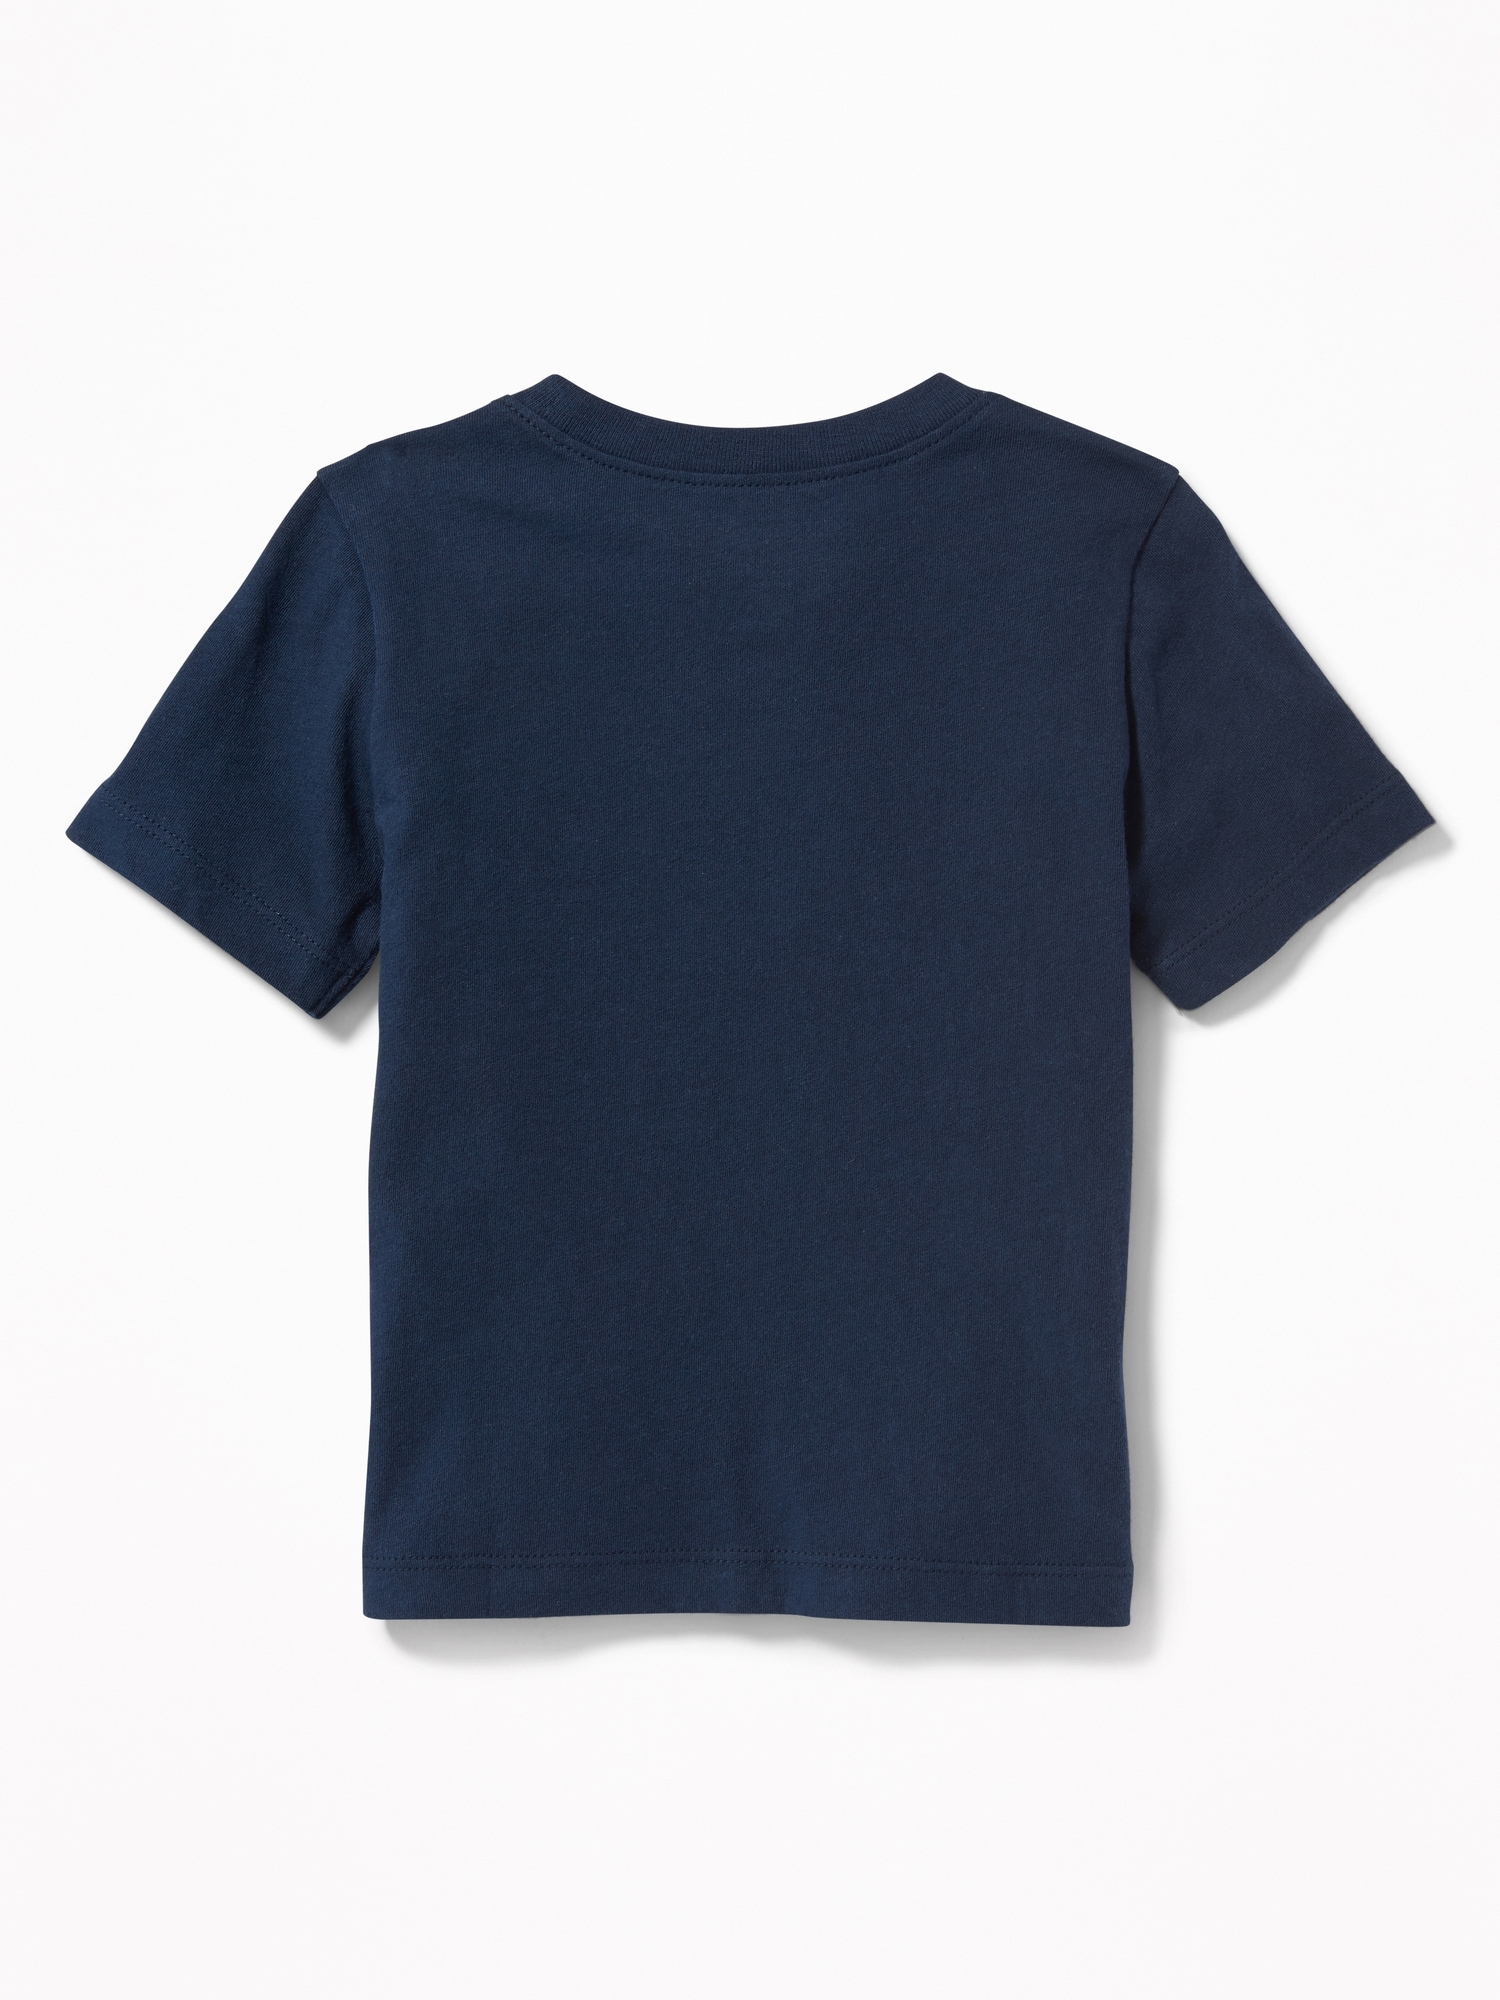 Rusty Rivets™ Crew-Neck Tee for Toddler Boys | Old Navy